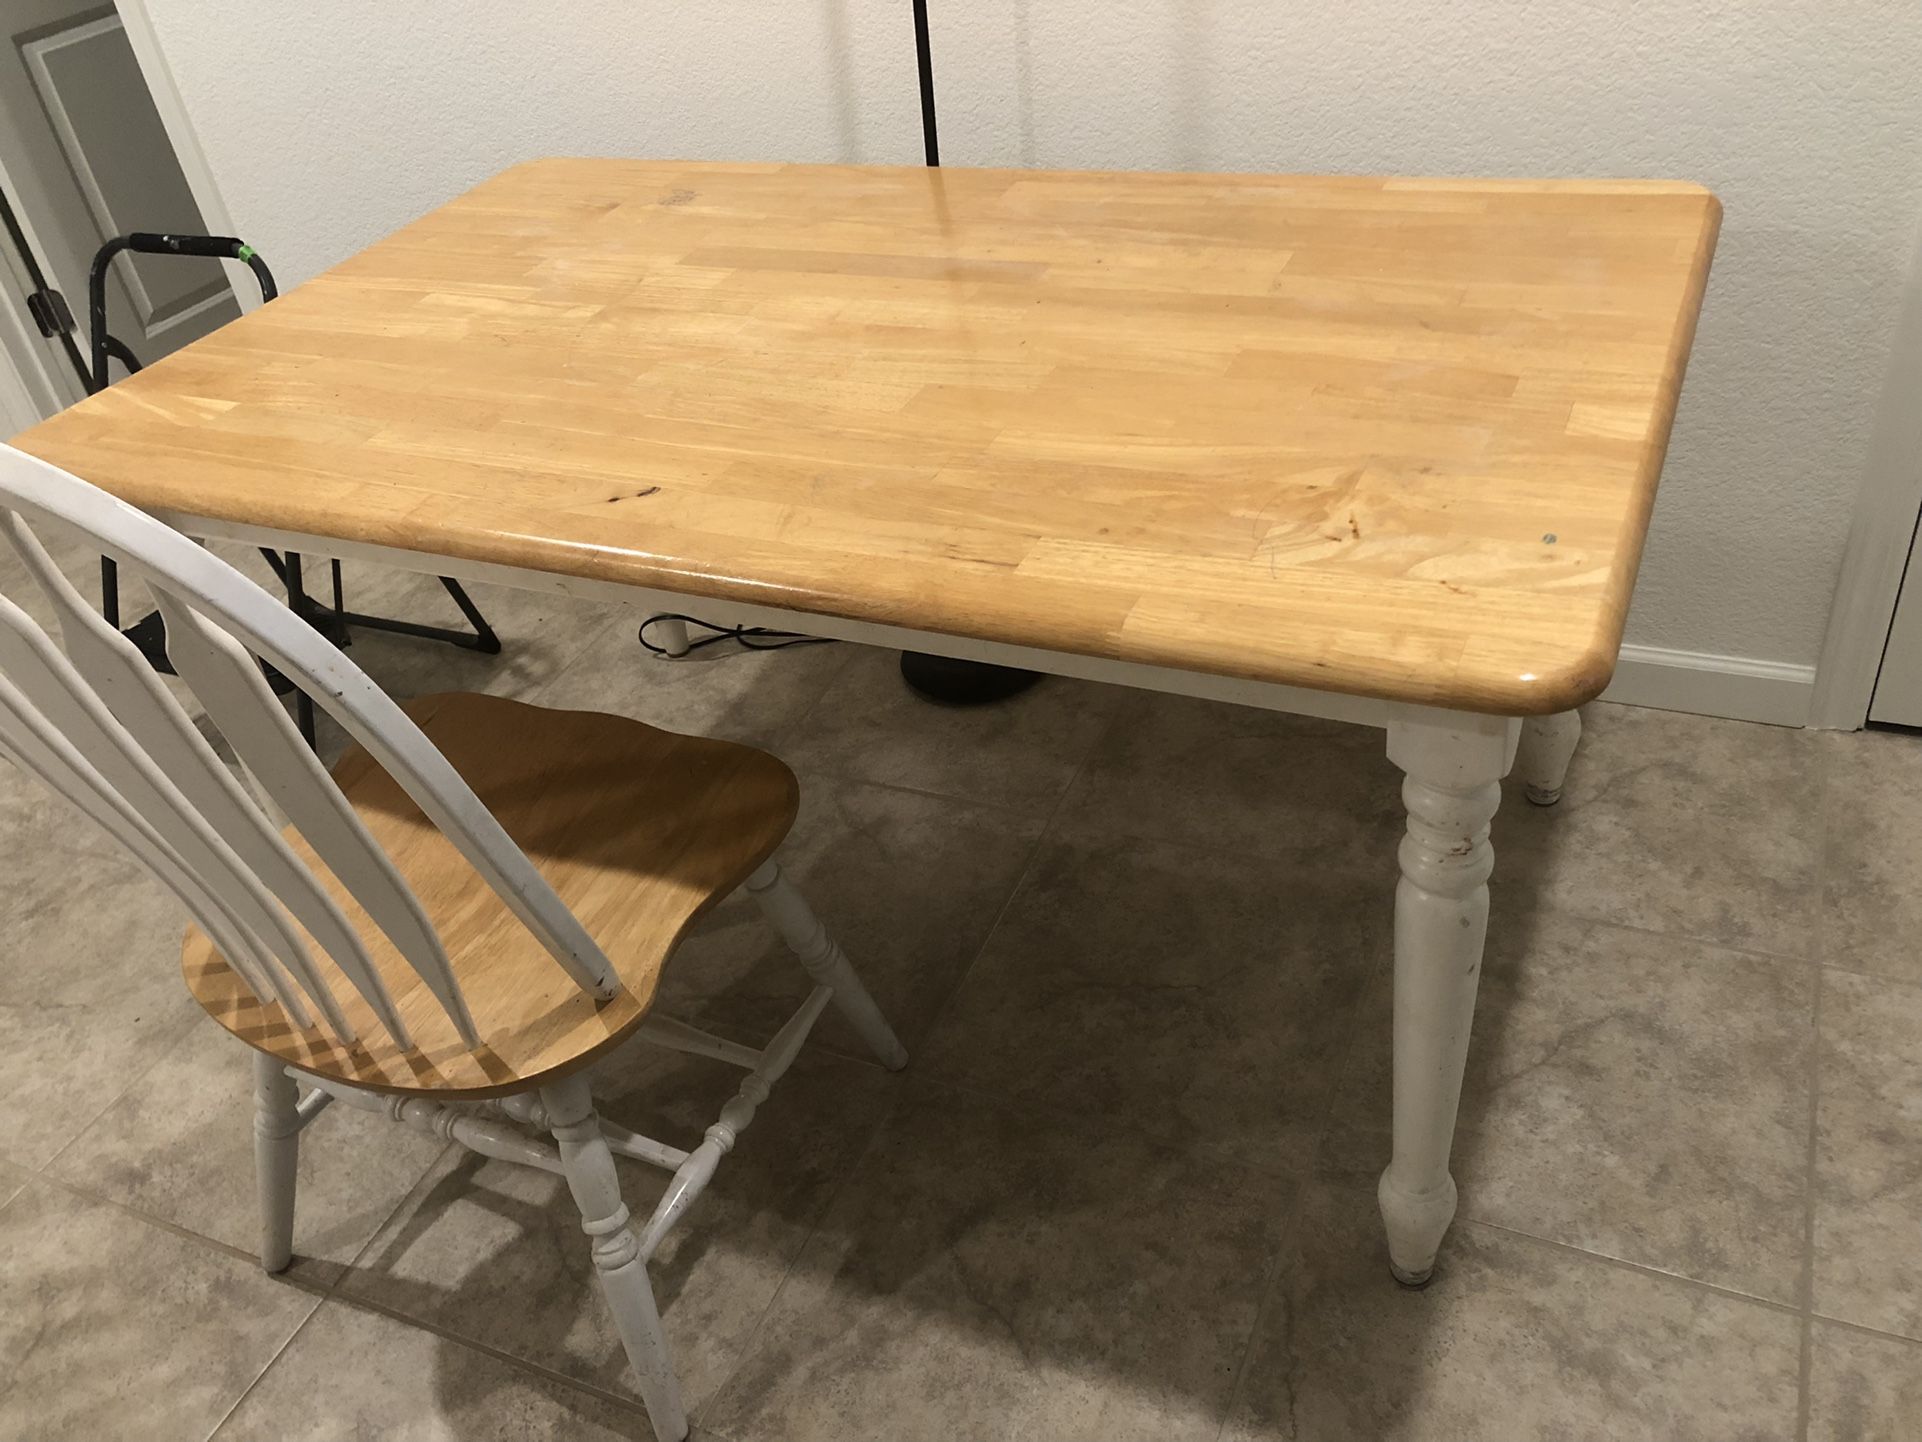 Dining Table With 4 Chairs. Price Reduced To $35